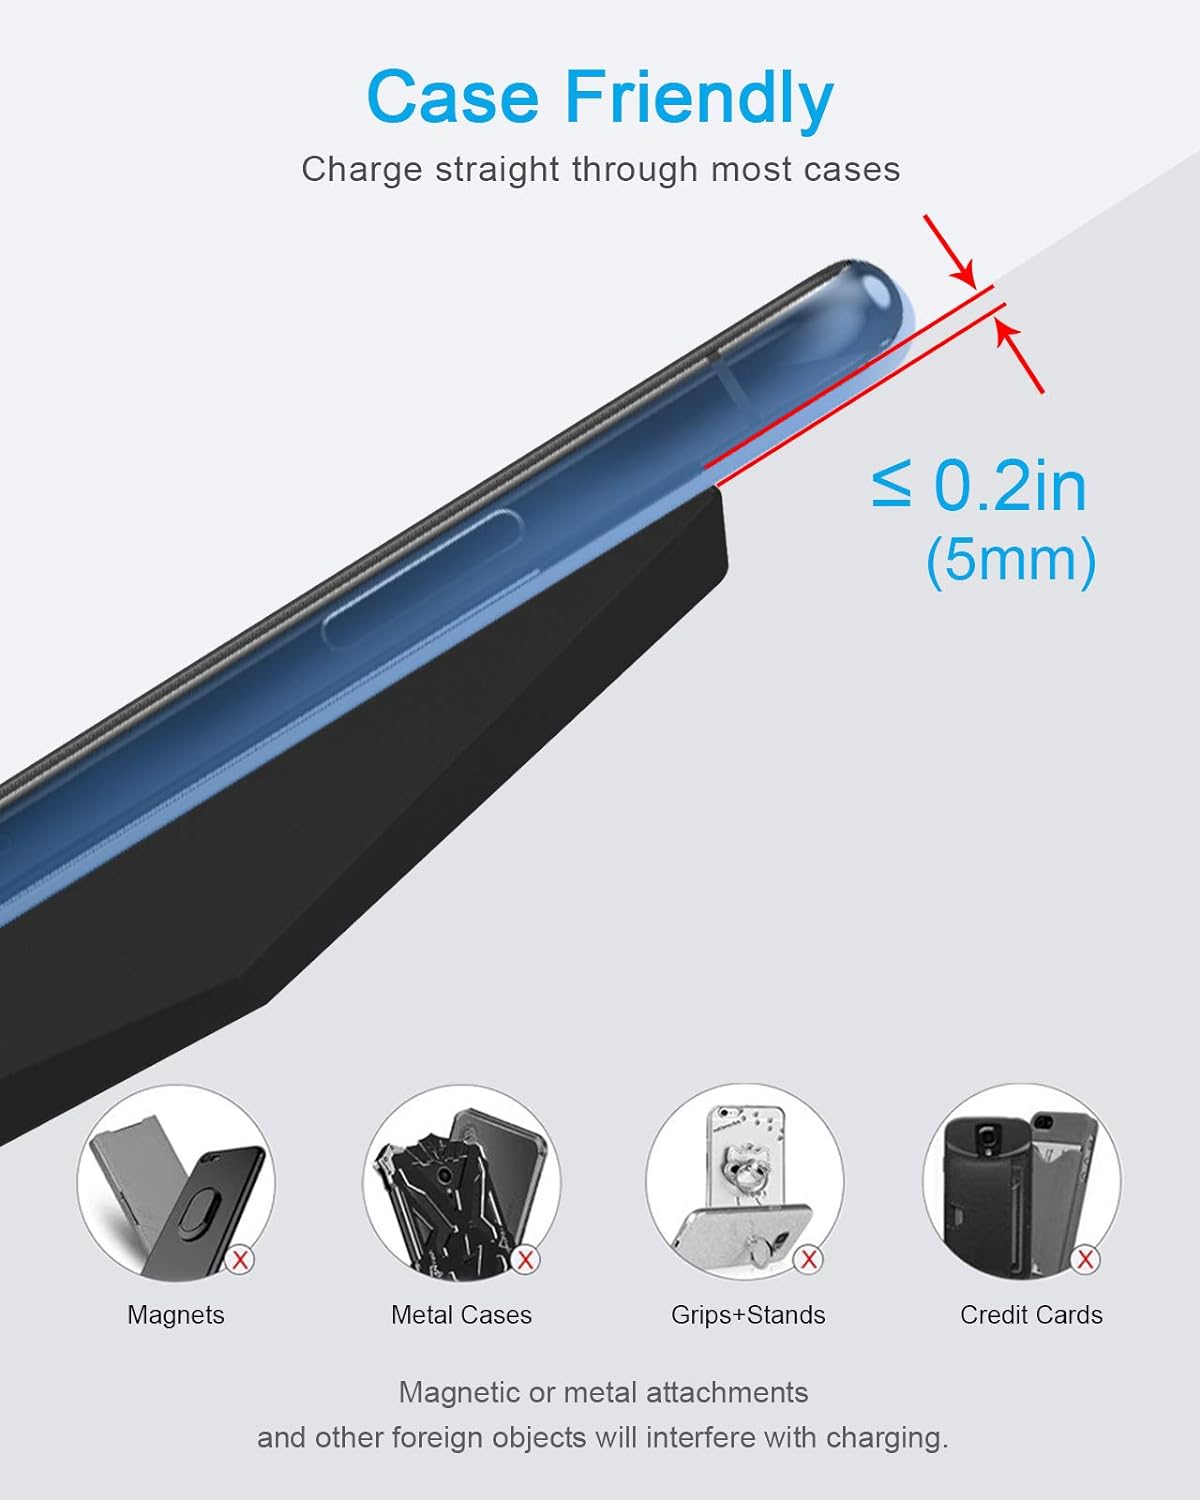 NANAMI 30W Max Wireless Charger, Qi Certified Fast Charging Stand with USB-A Port,Compatible iPhone 13/12/SE 2020/11 Pro/XS Max/XR/X/8 Plus,Galaxy S21 S20 S10 S9 S8, Note 20/10/9/8(with PD Adapter)